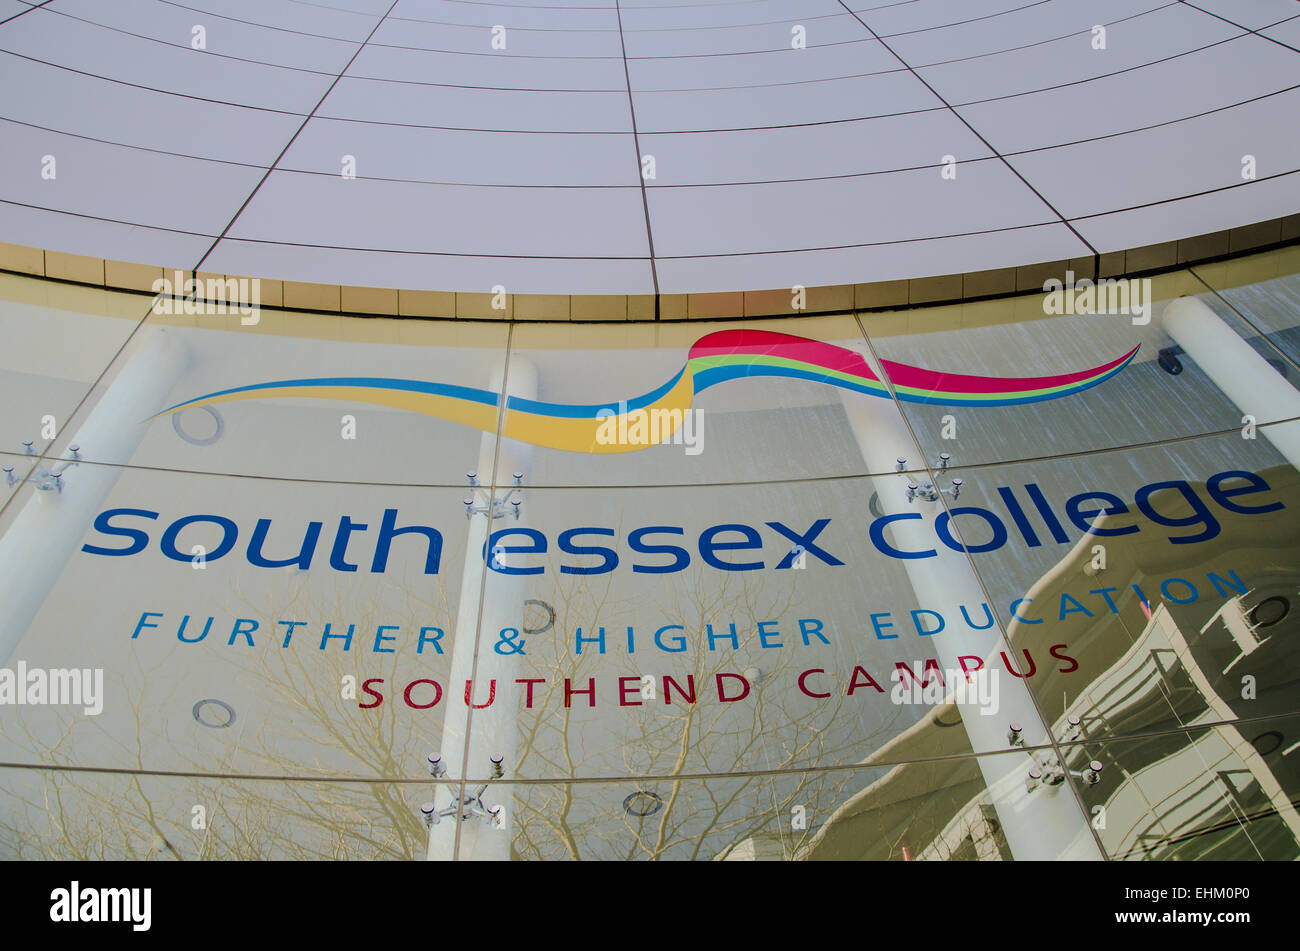 South Essex College of Further and Higher Education is a further education college located in Southend on Sea, Essex. Southend Campus. Logo Stock Photo